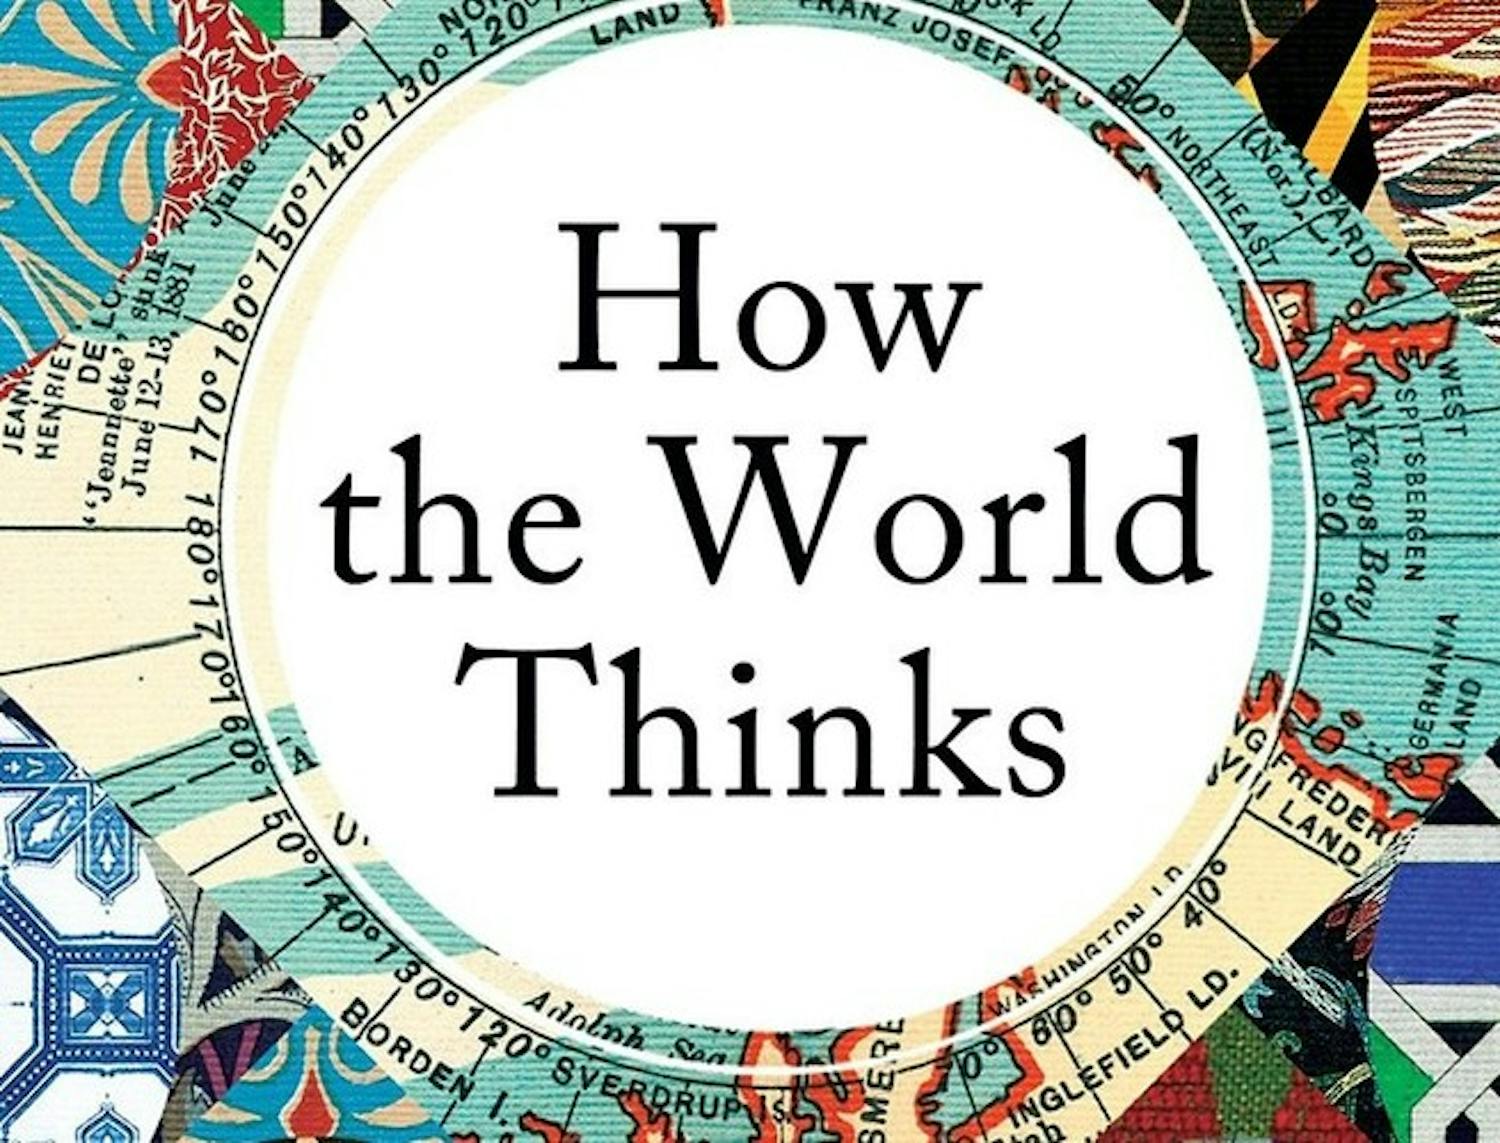 Chapter 248: 'How the Work Thinks' with Julian Baggini